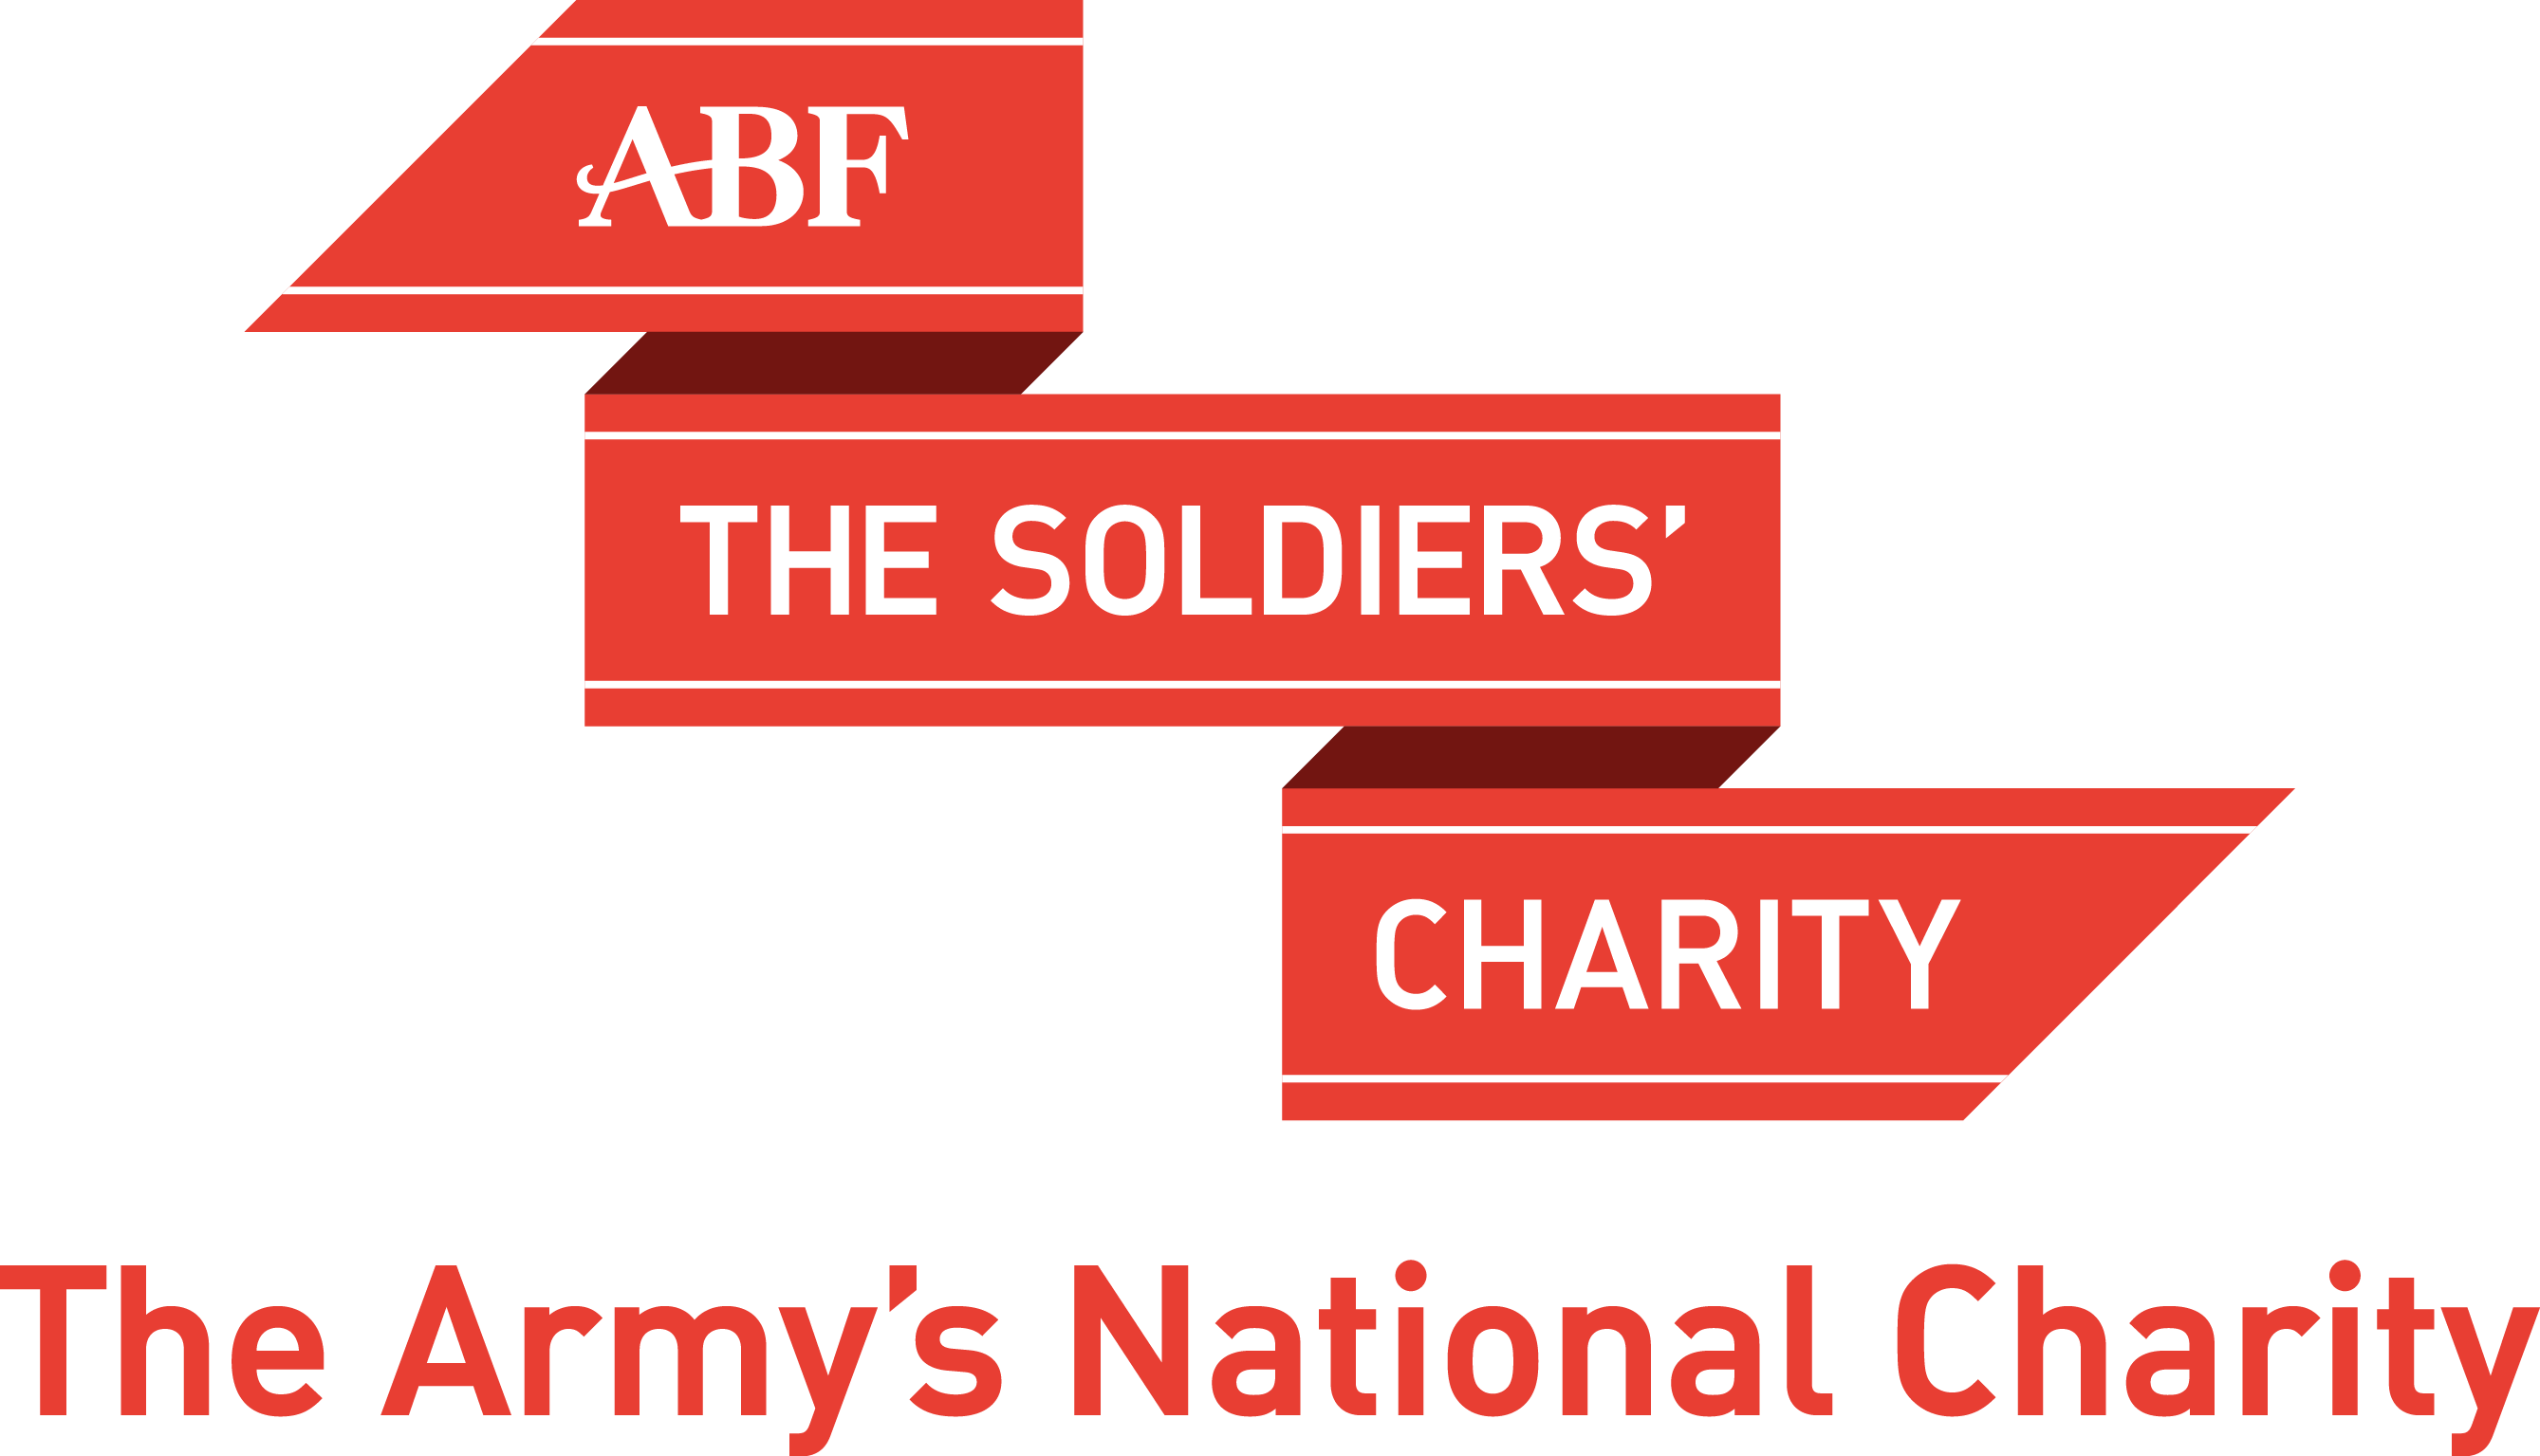 ABF The Soldier's Charity logo